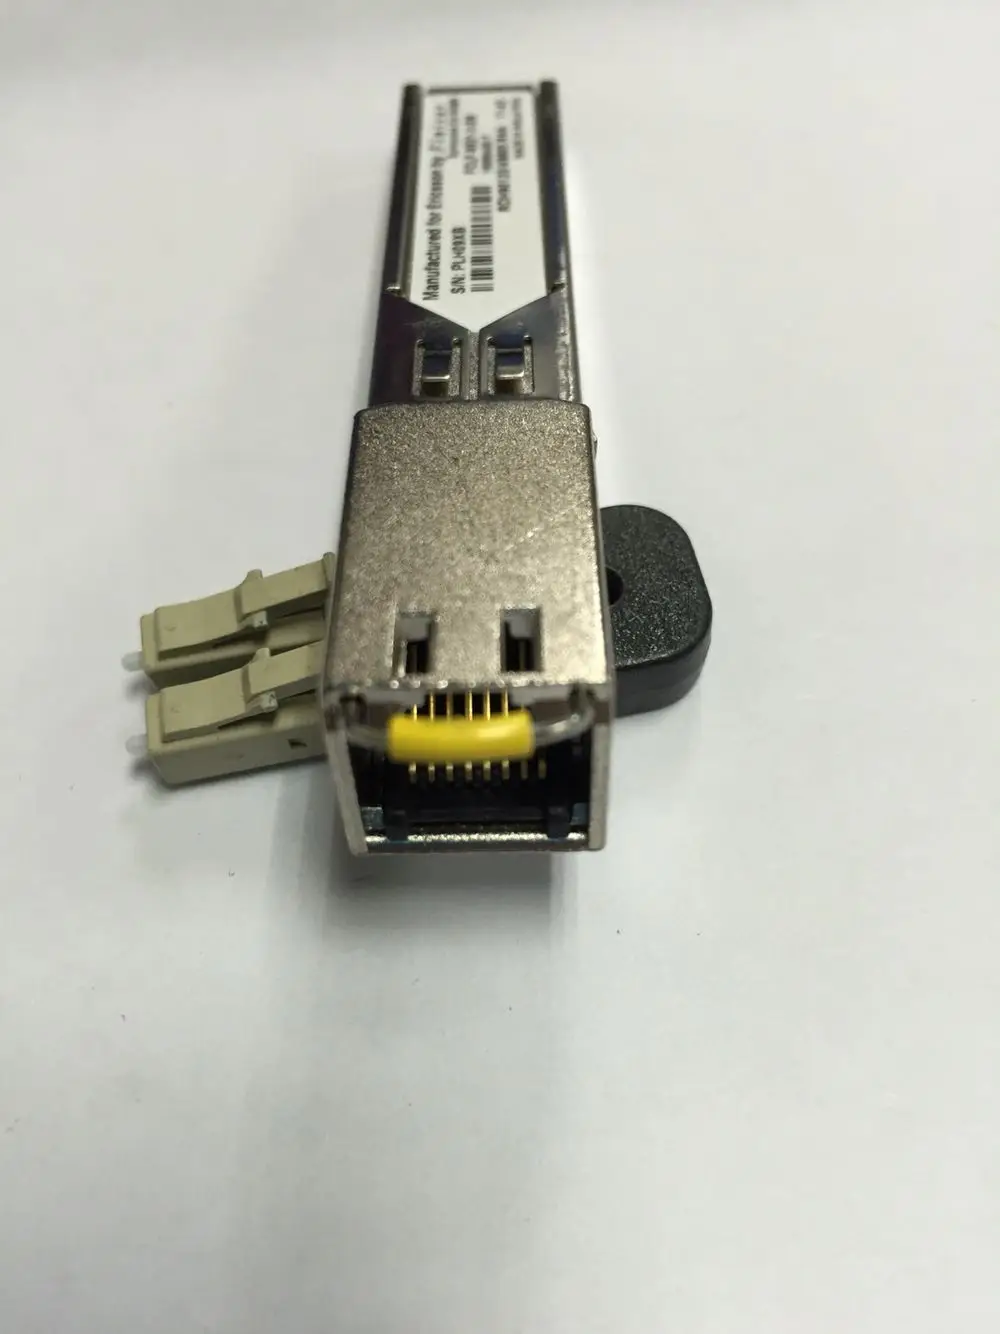 

Manufactured for Ericsson by Finisar FCLF-8521-3-ER 1000BASE-T RDH90120/49800 R4A RJ45